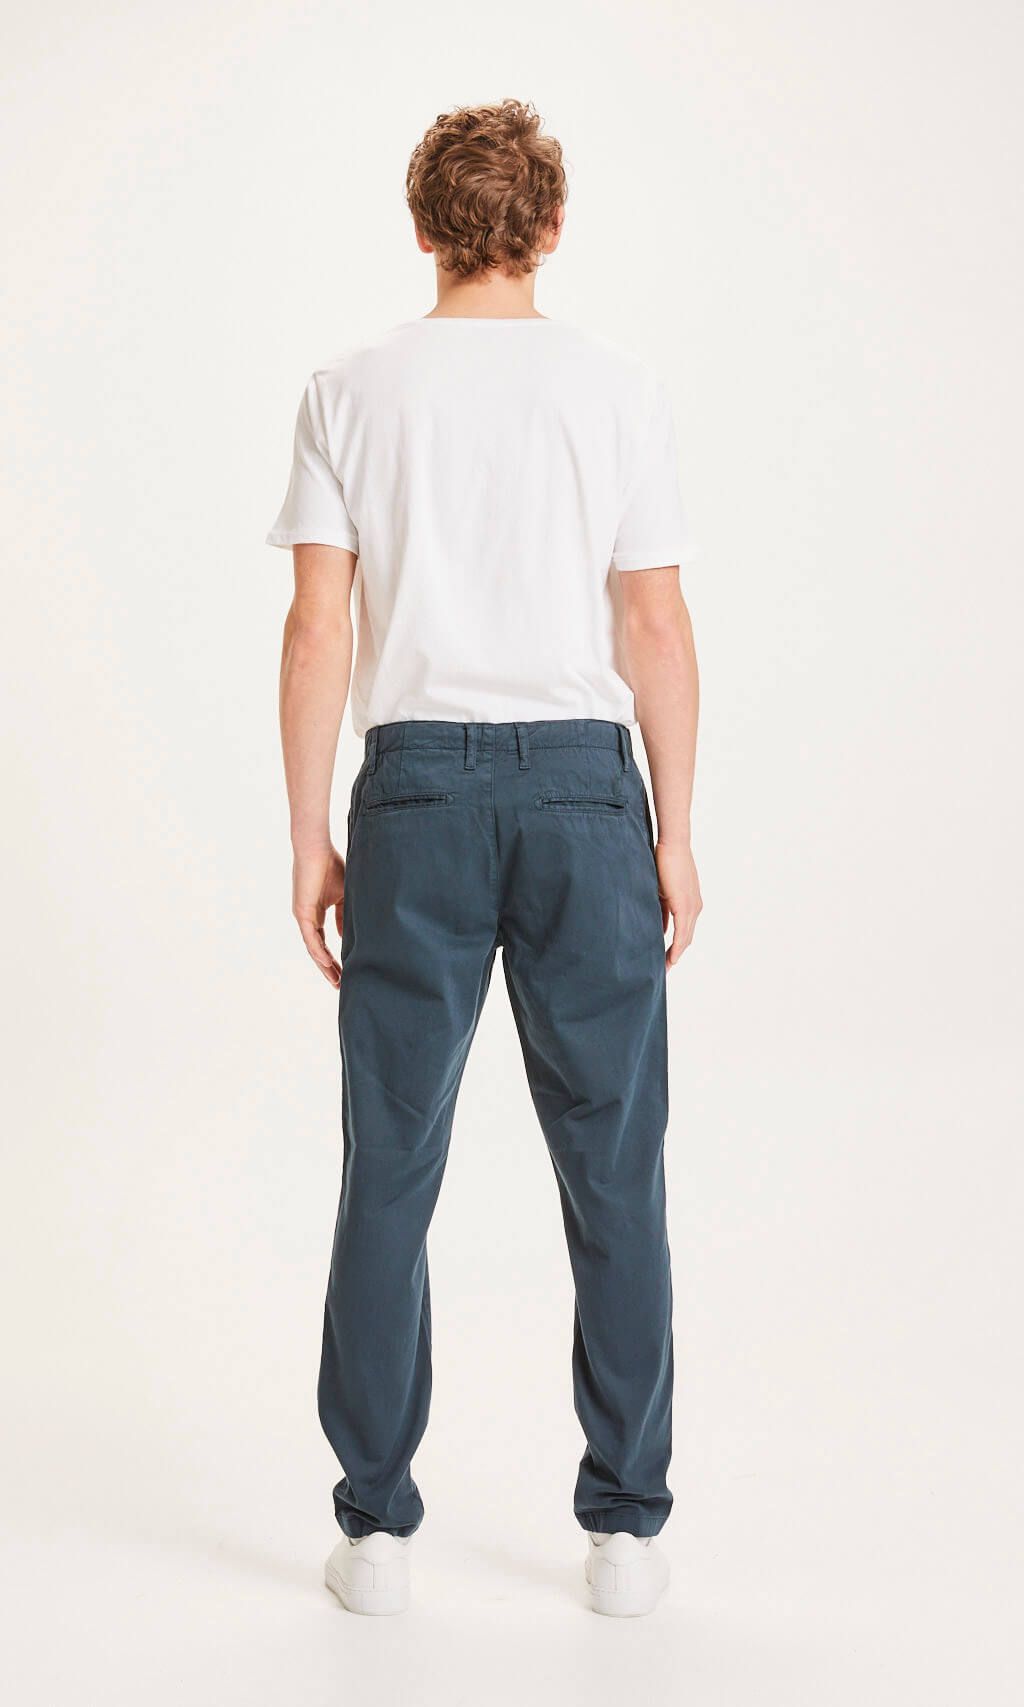 Chuck Regular Stretched Chino Pant Total Eclipse 30/30